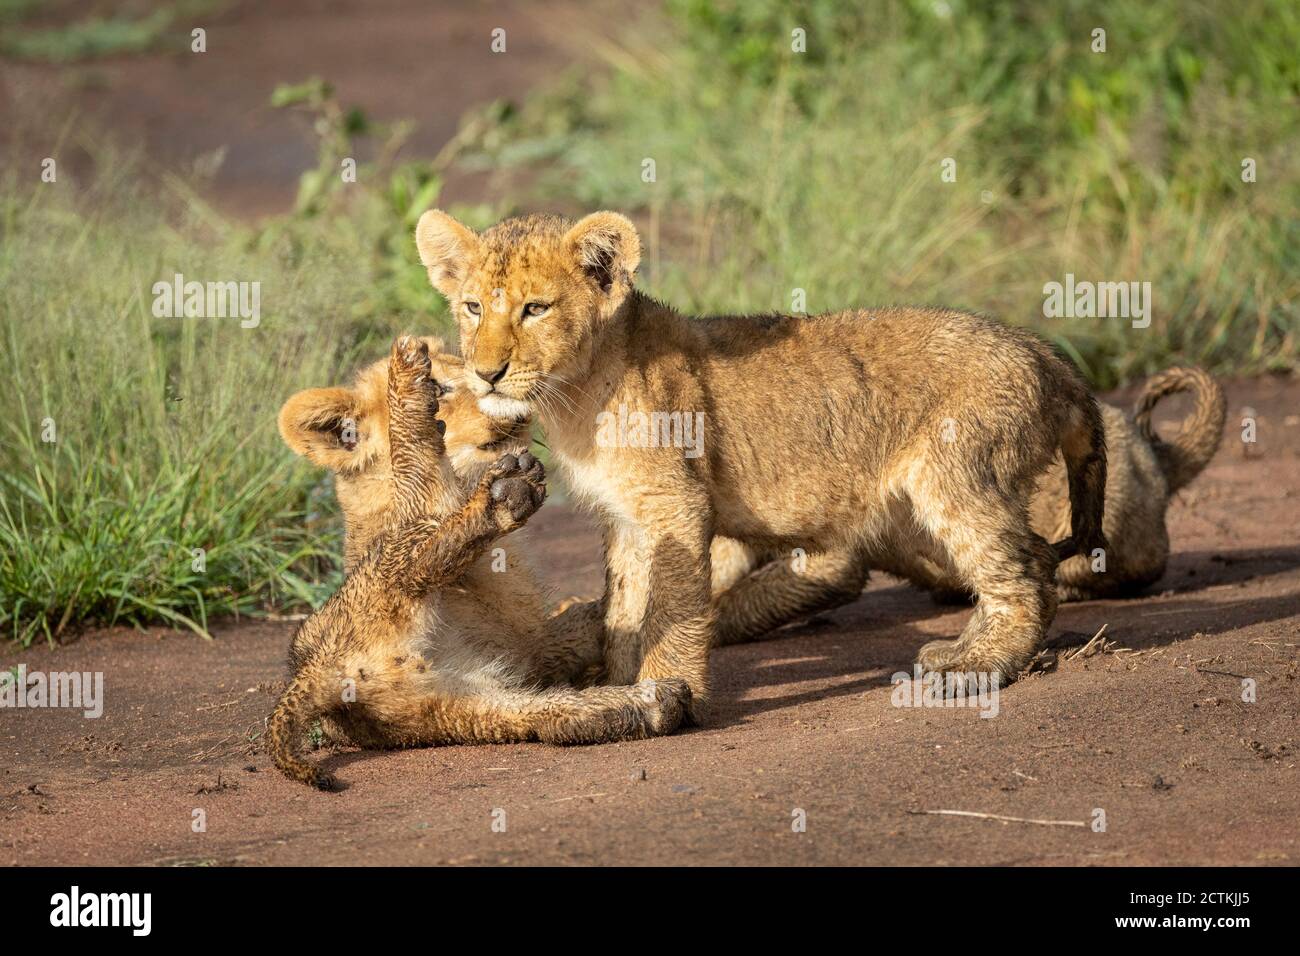 Two small baby lions playing in Serengeti in Tanzania Stock Photo